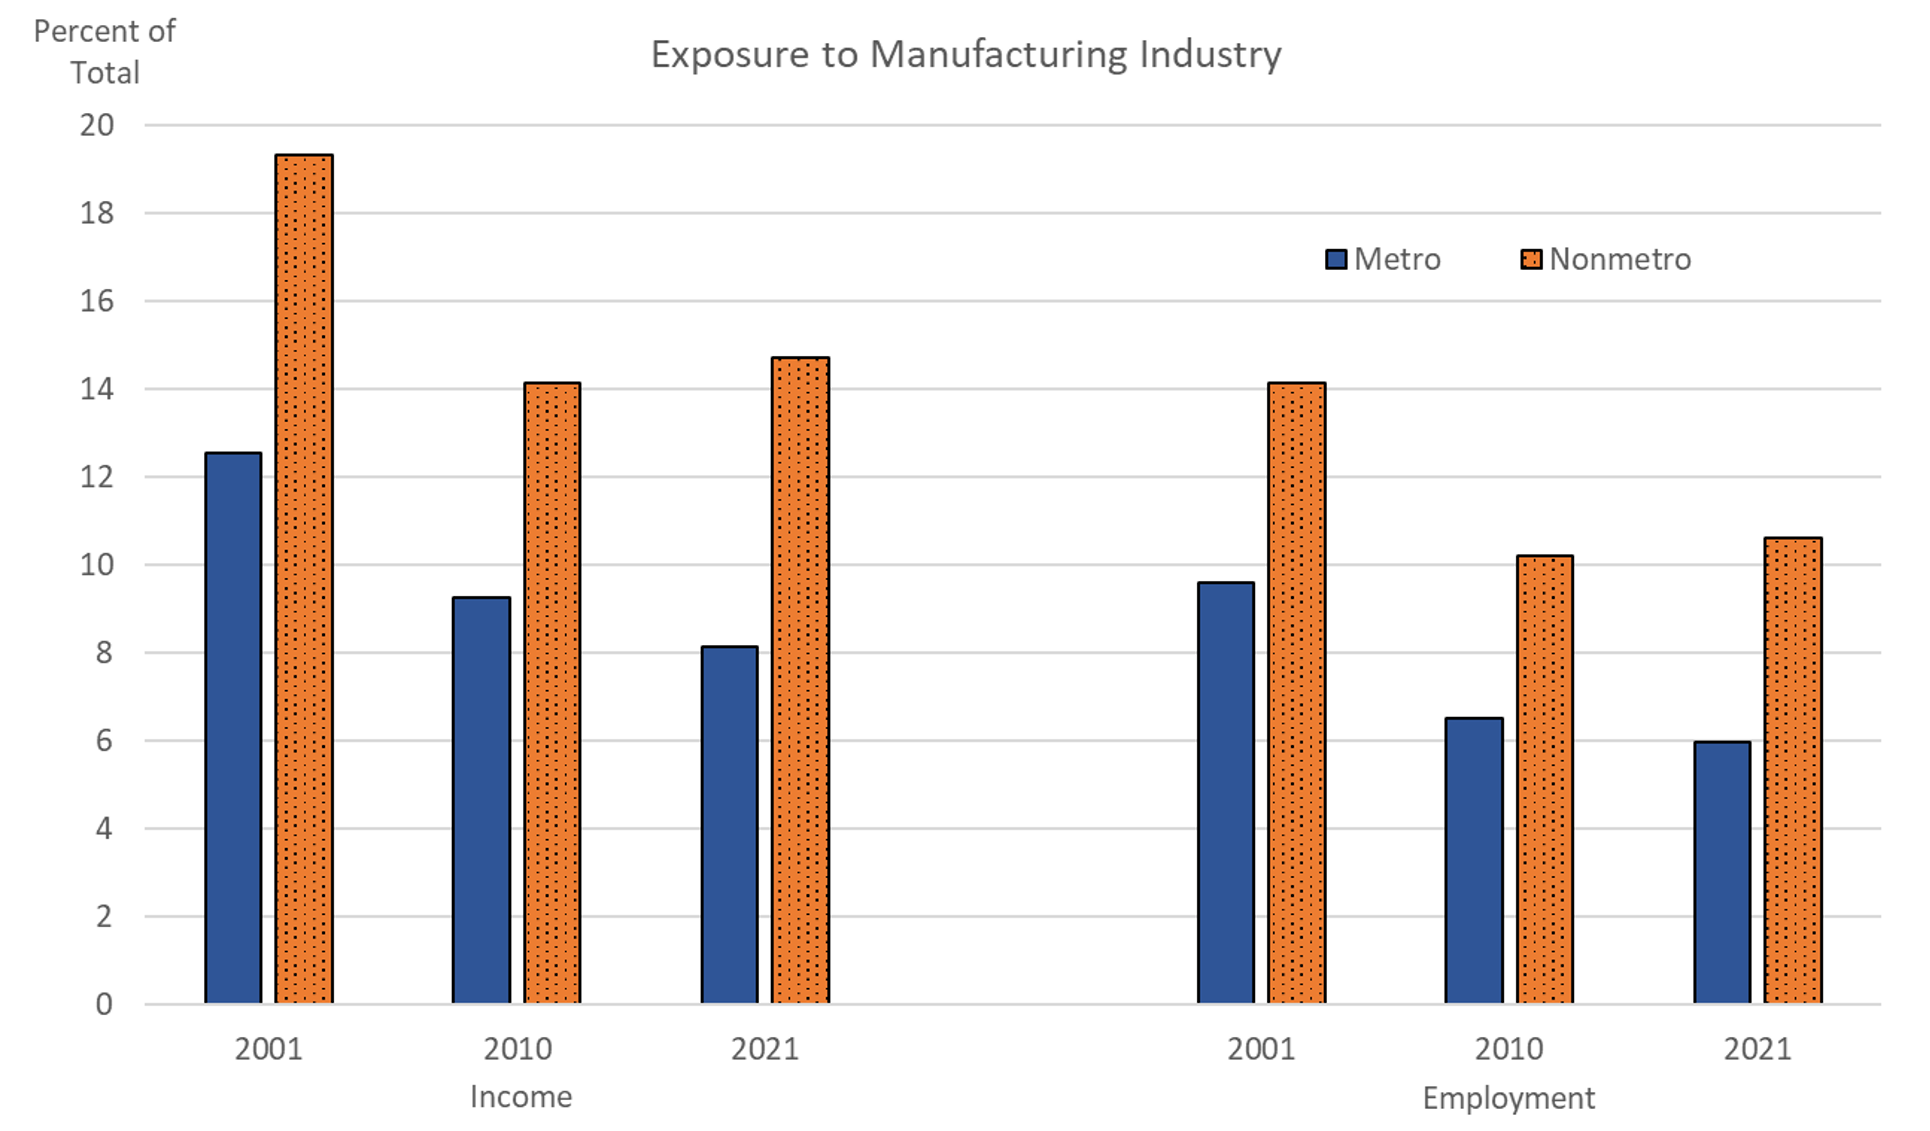 Figure 3. Metro and nonmetro exposure to the manufacturing industry. See accessible link for data.